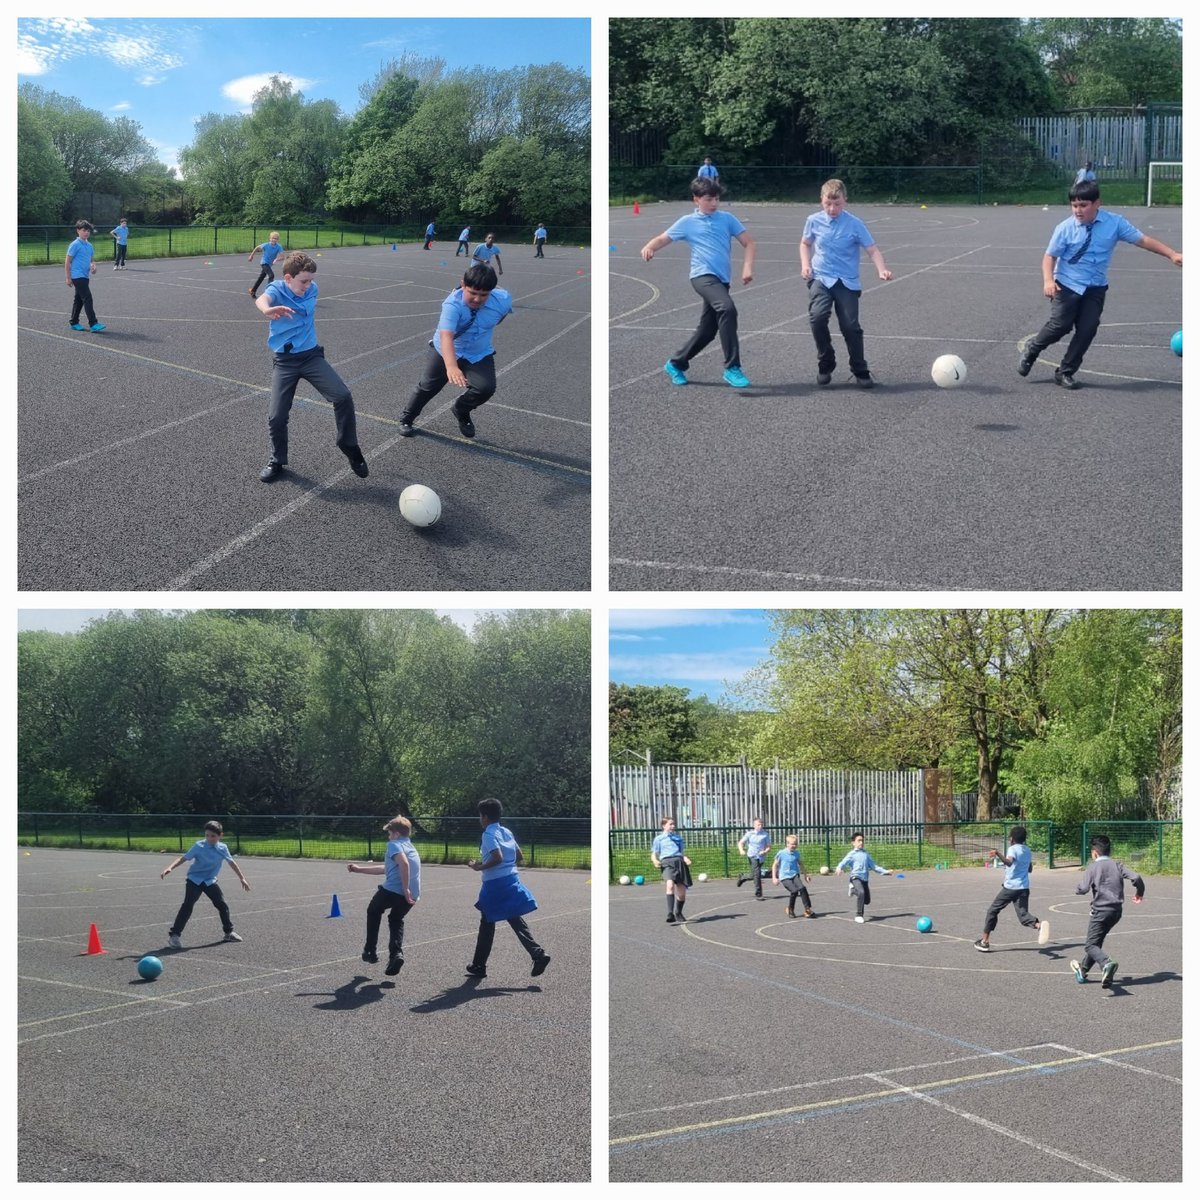 Action shots from our second football masterclass #article29 #article12